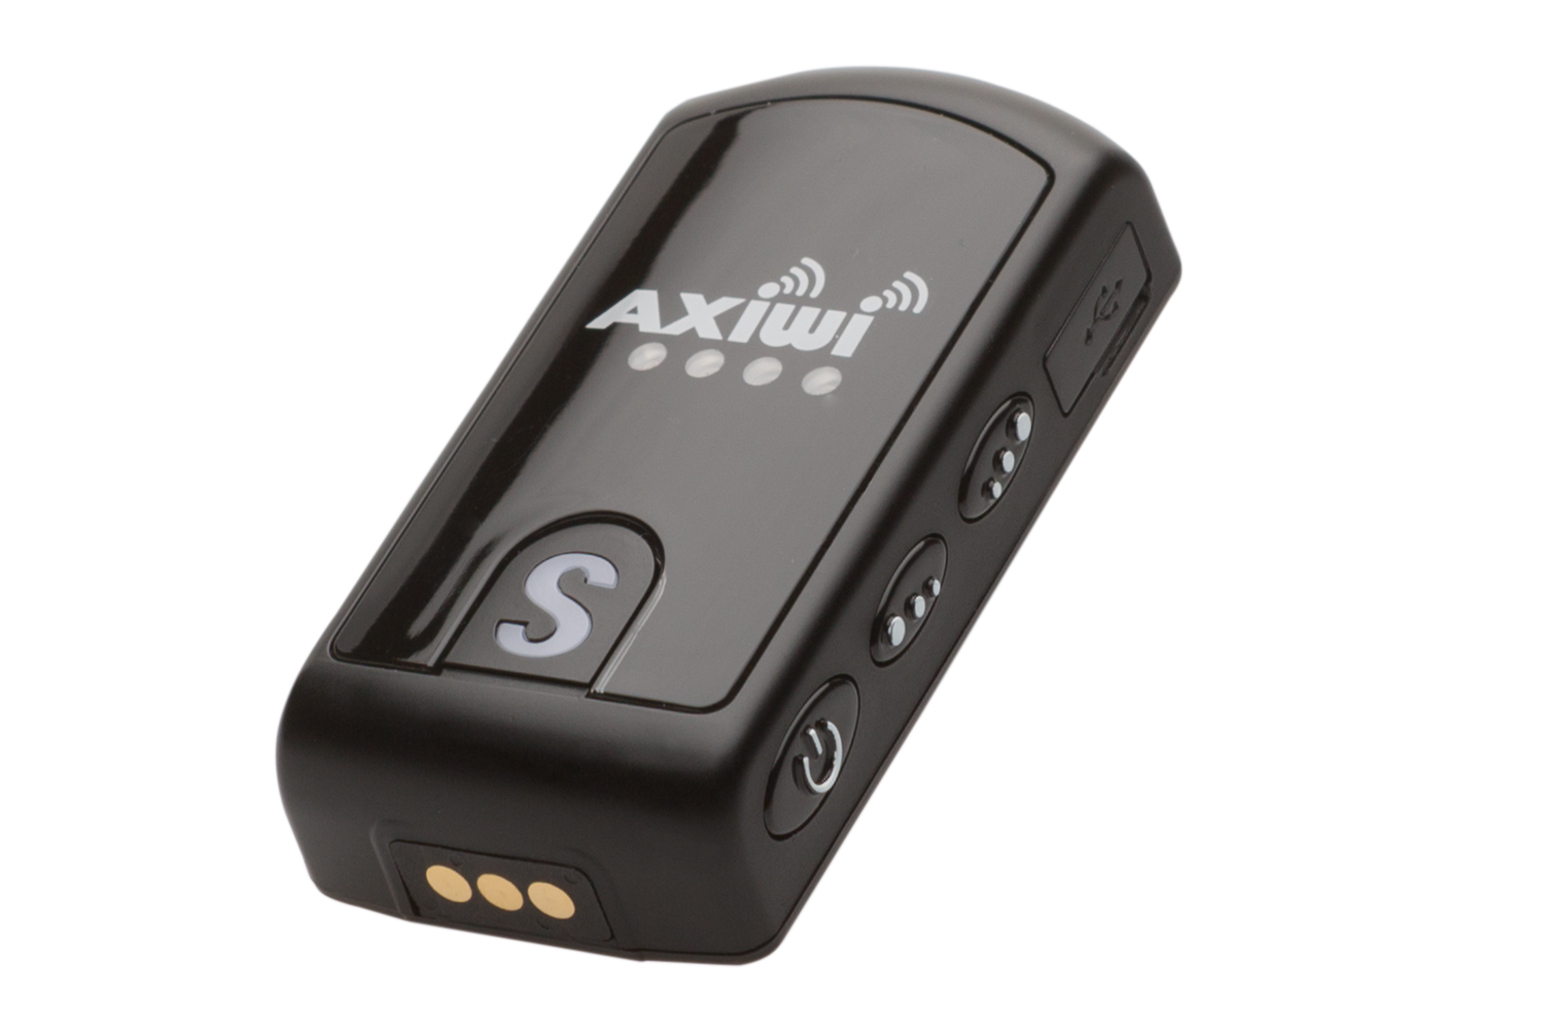 axitour-axiwi-at-320-communication-system